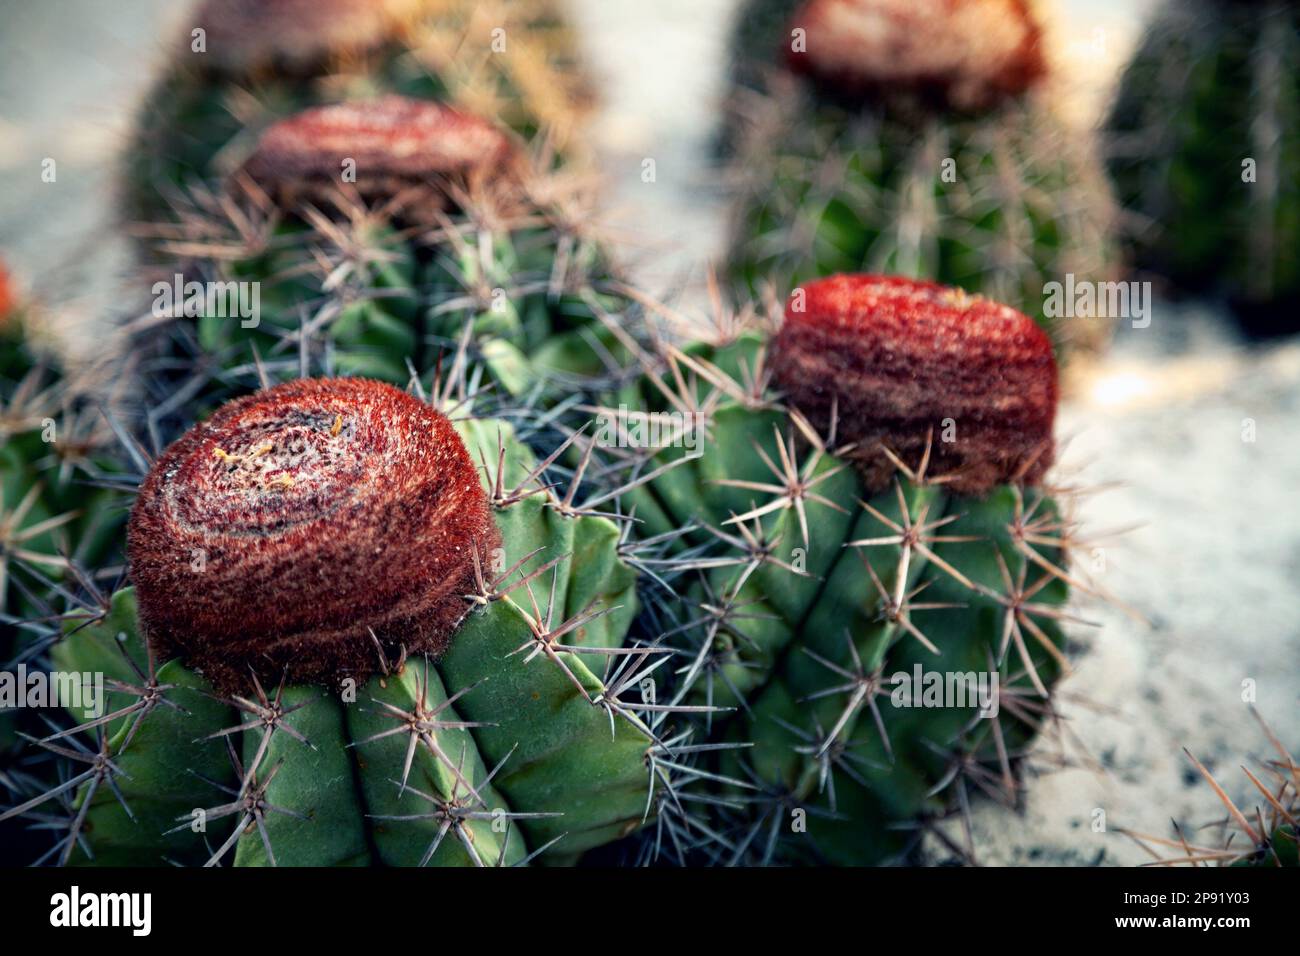 Melocactus on the sandy land in a desert close-up. Group of decorative cactus plants with red caps flowers Stock Photo